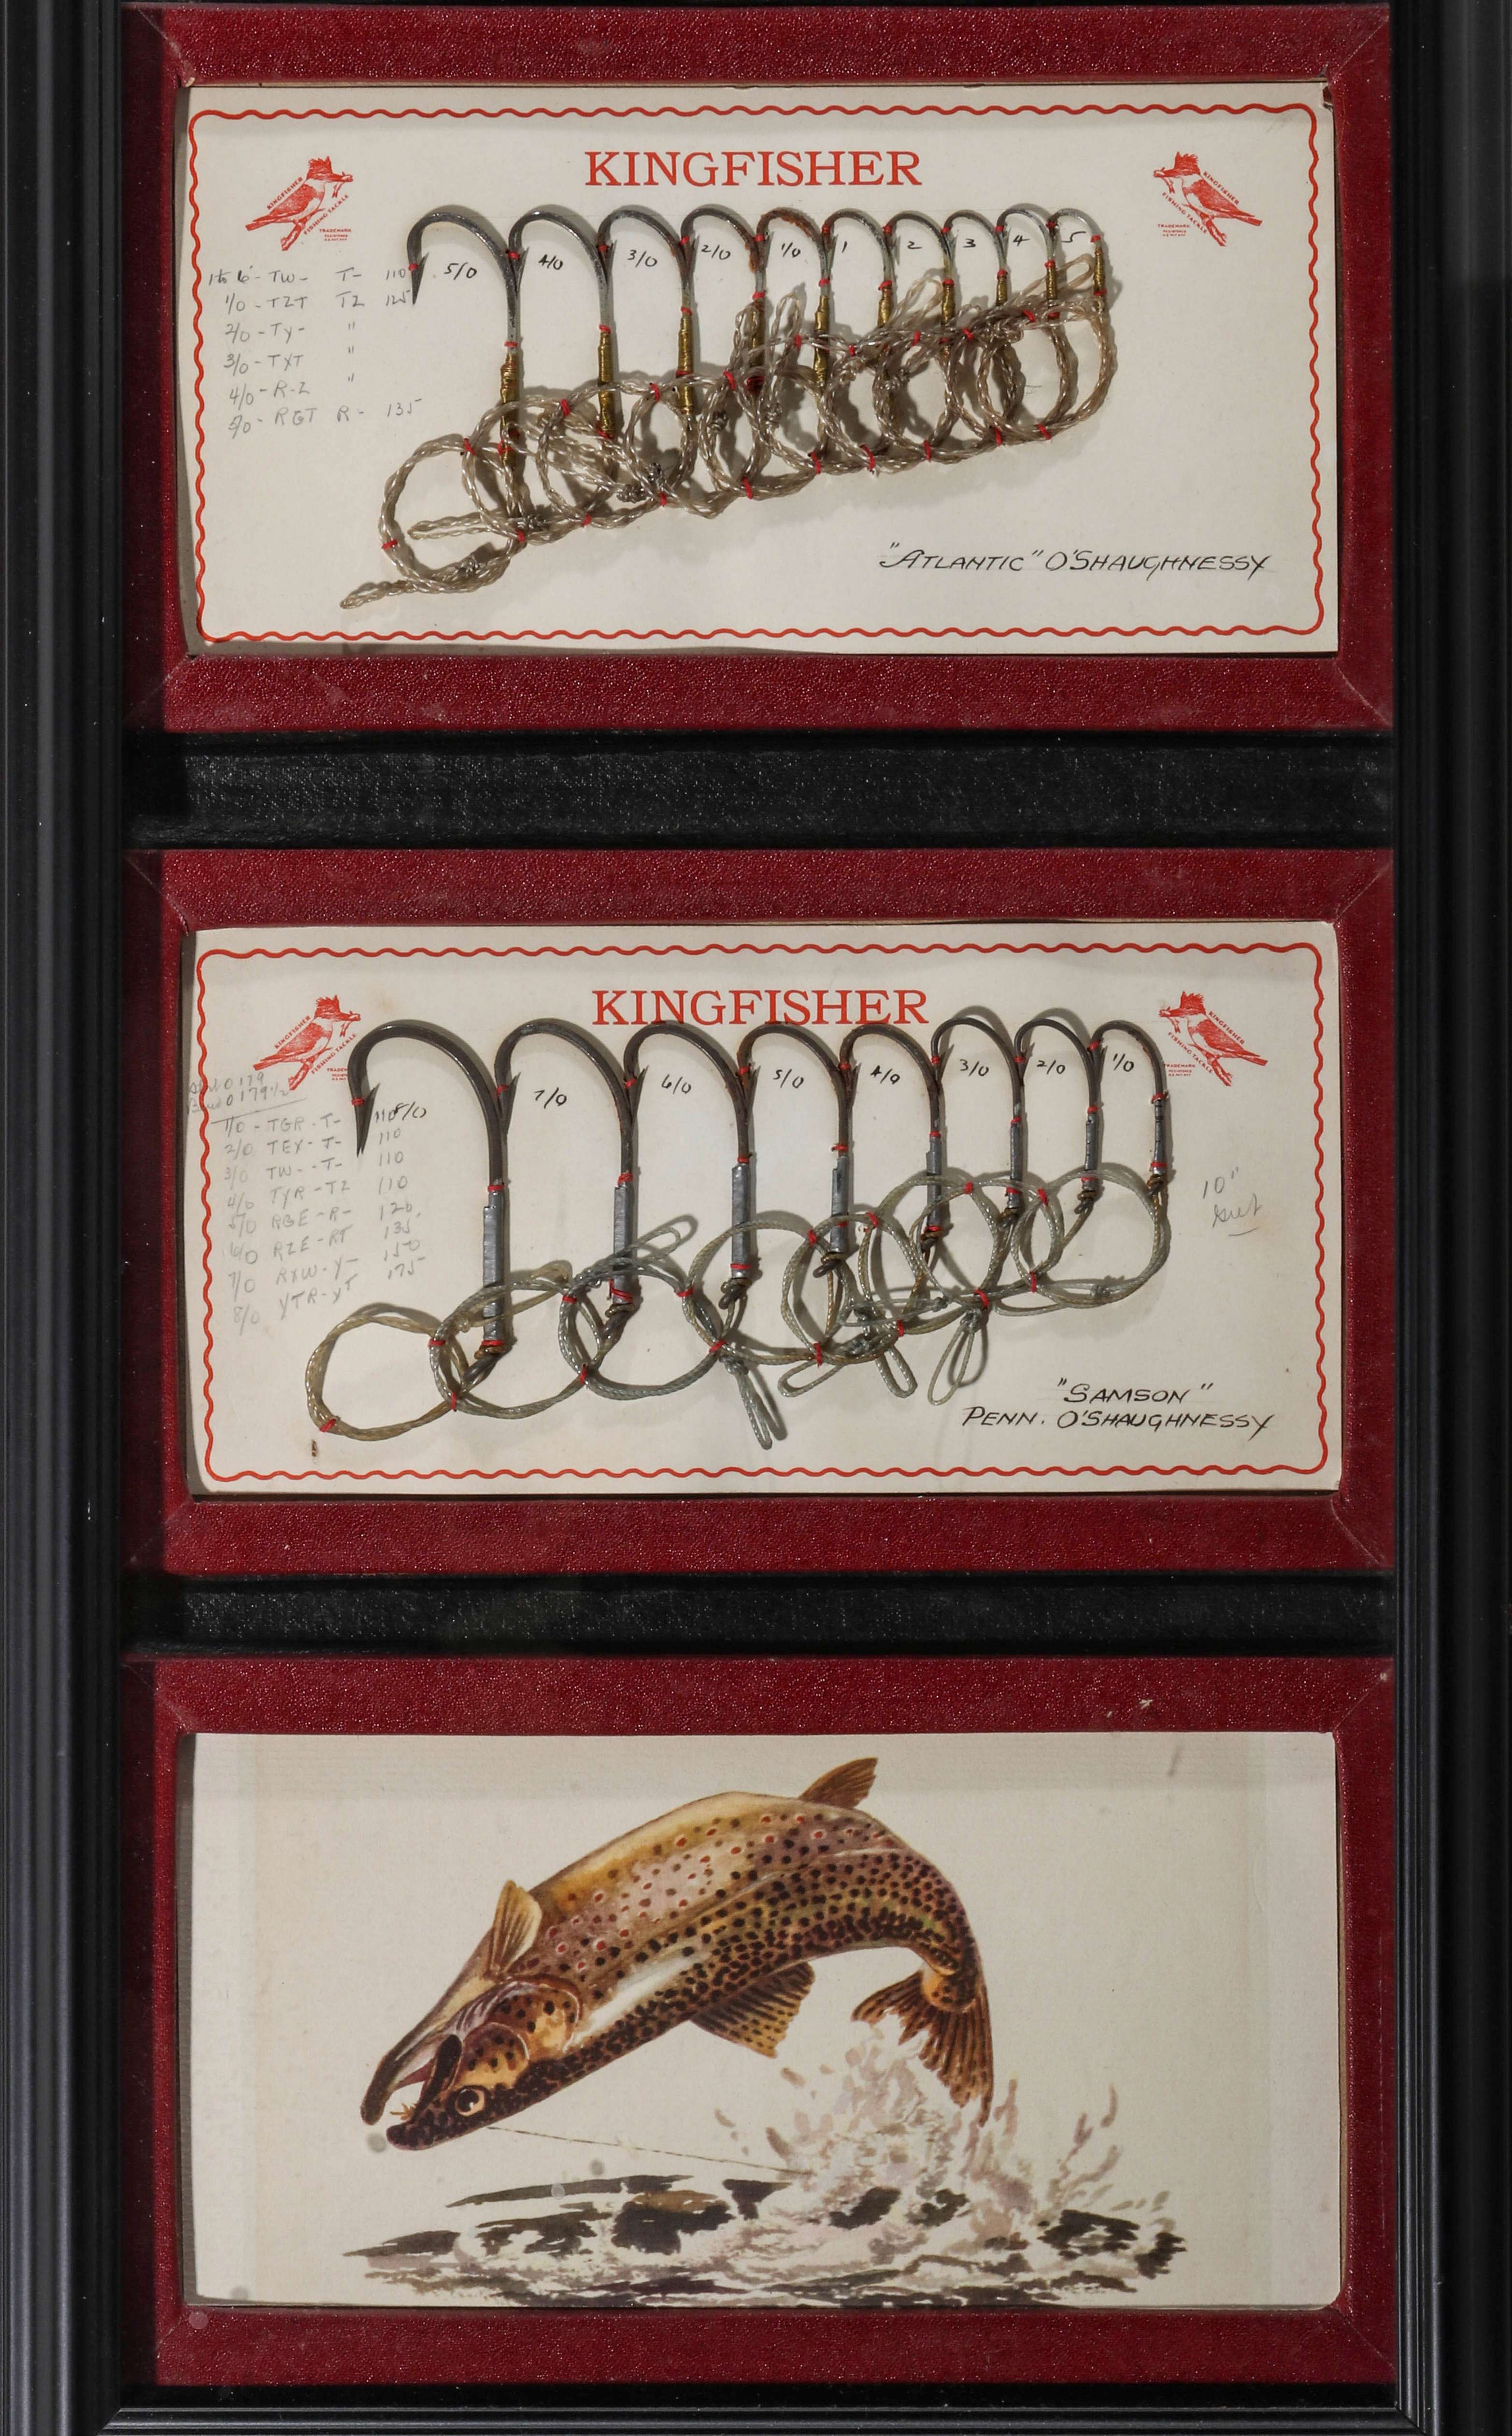 A FRAMED COLLECTION OF NEW-OLD-STOCK KINGFISHER HOOKS